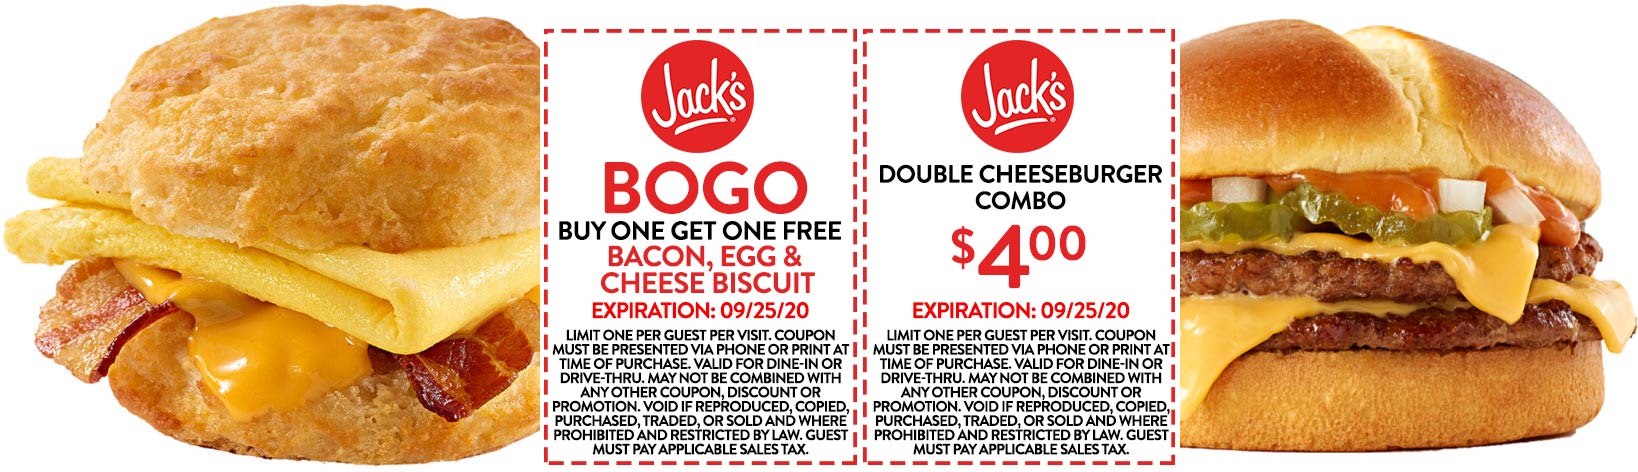 Jacks restaurants Coupon  Second bacon egg cheese biscuit free & $4 double cheeseburger meal at Jacks #jacks 